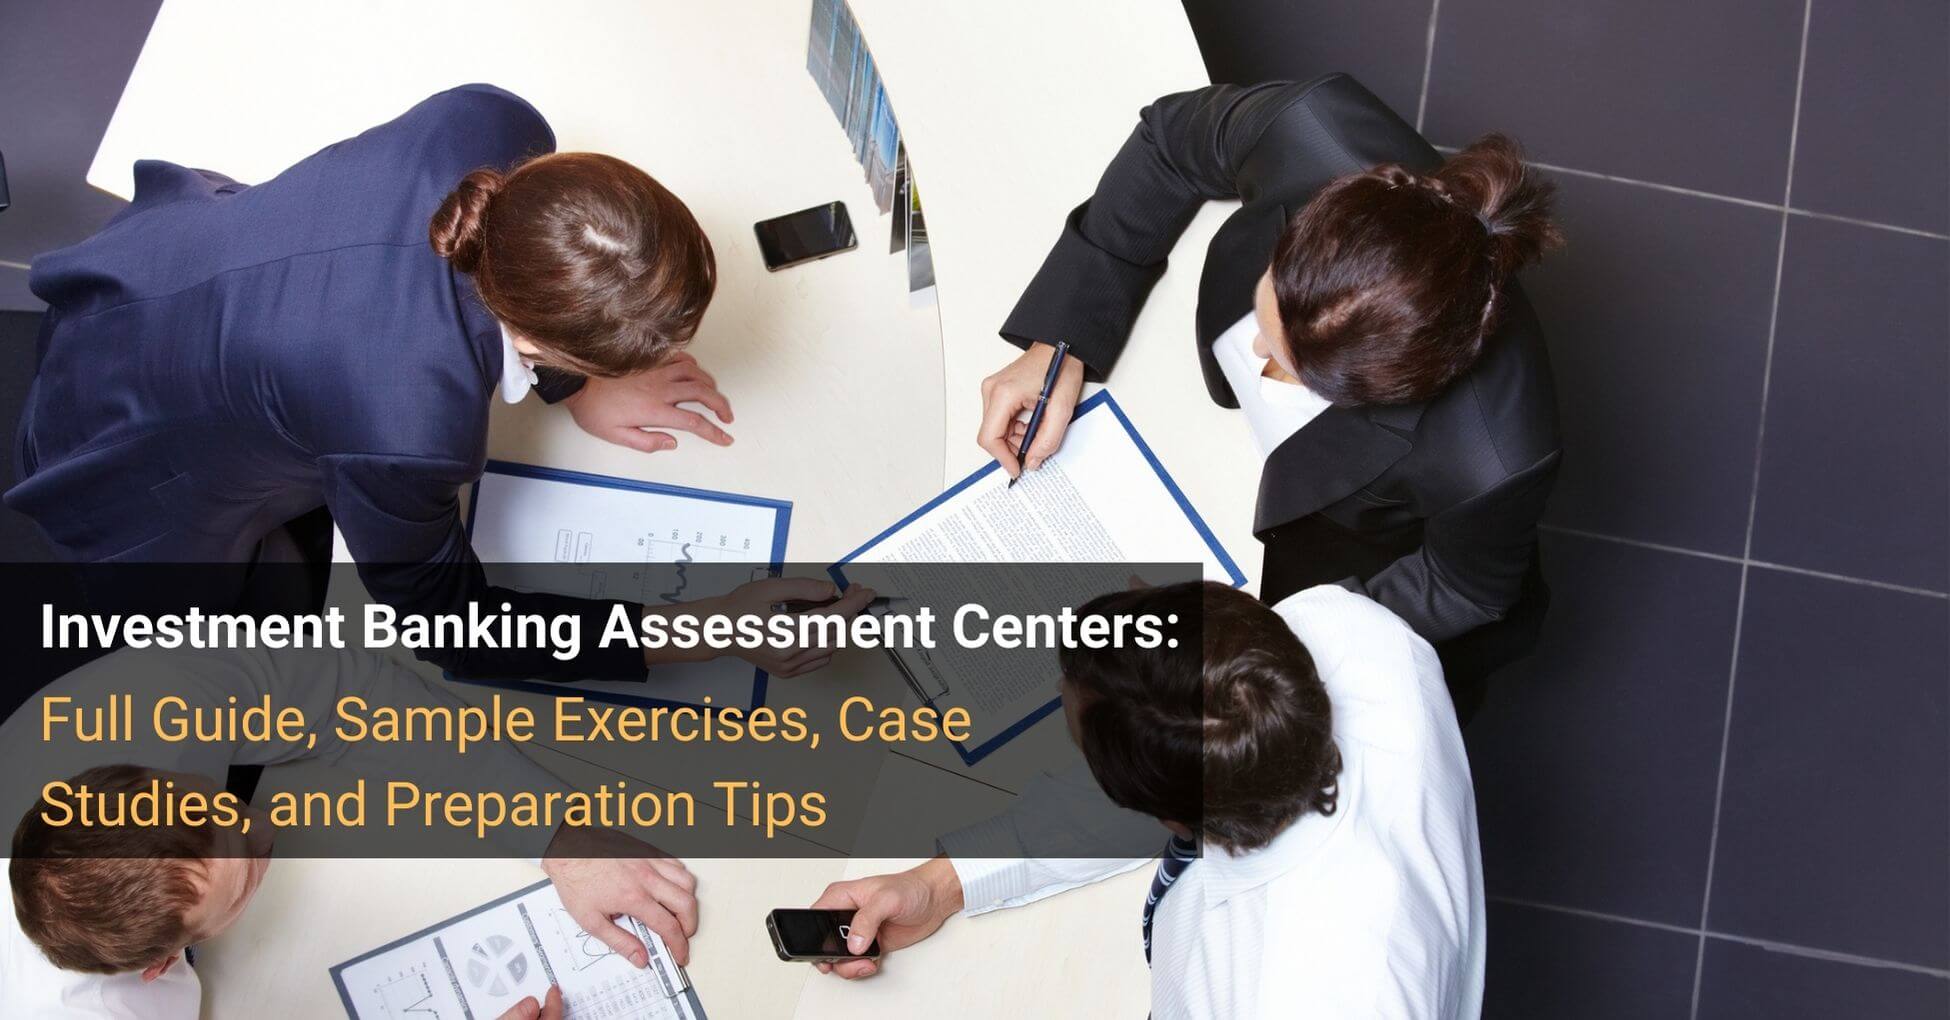 Investment Banking Assessment Centers